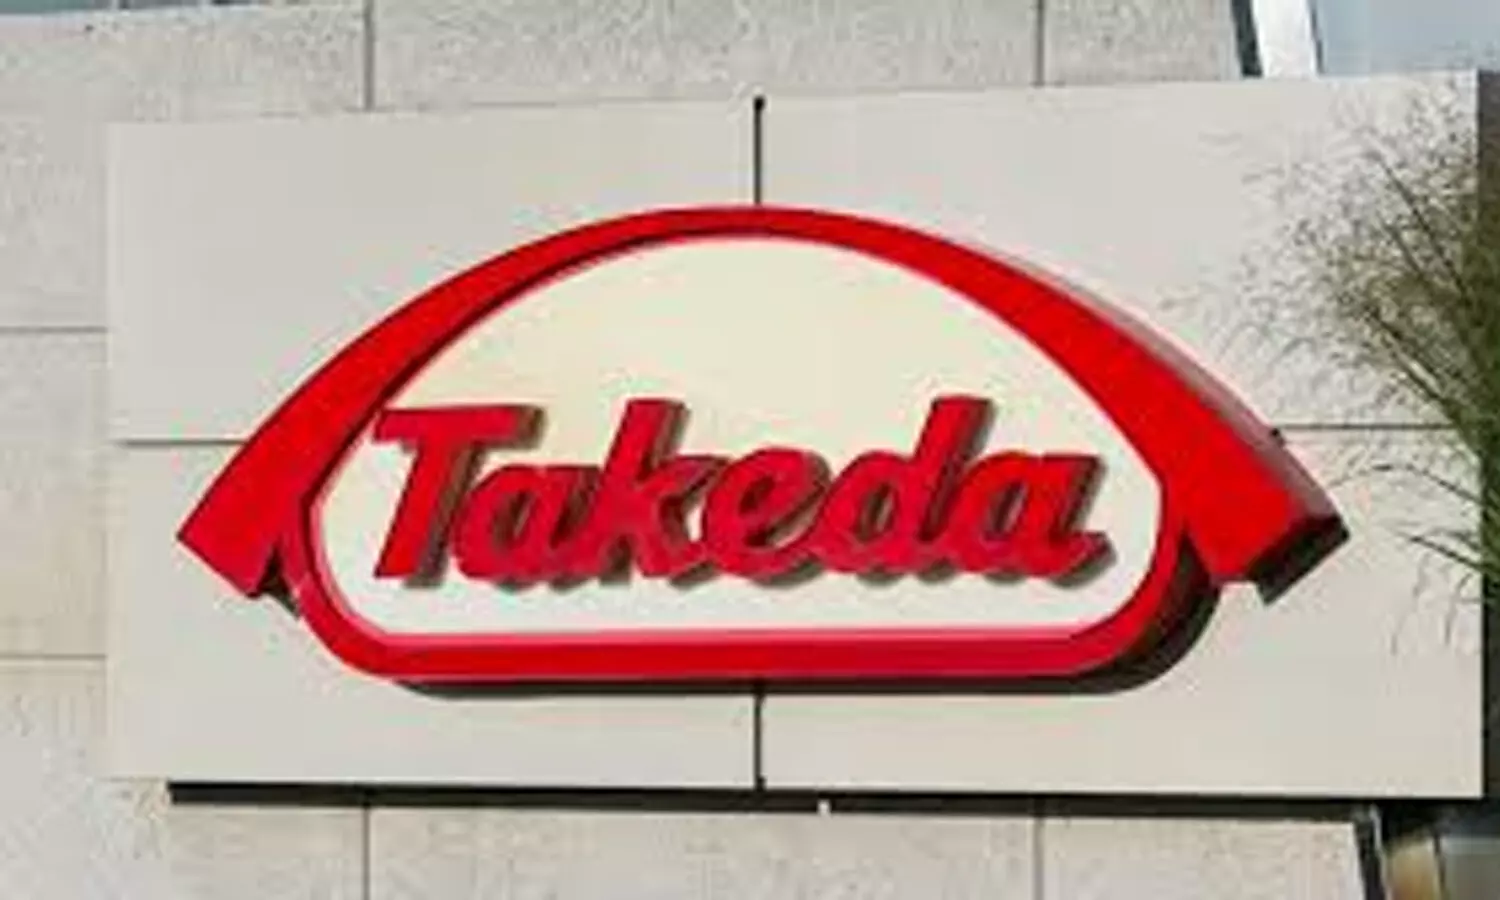 Takeda launches mobile app XPERT EASE to help treatment of genetic disorders